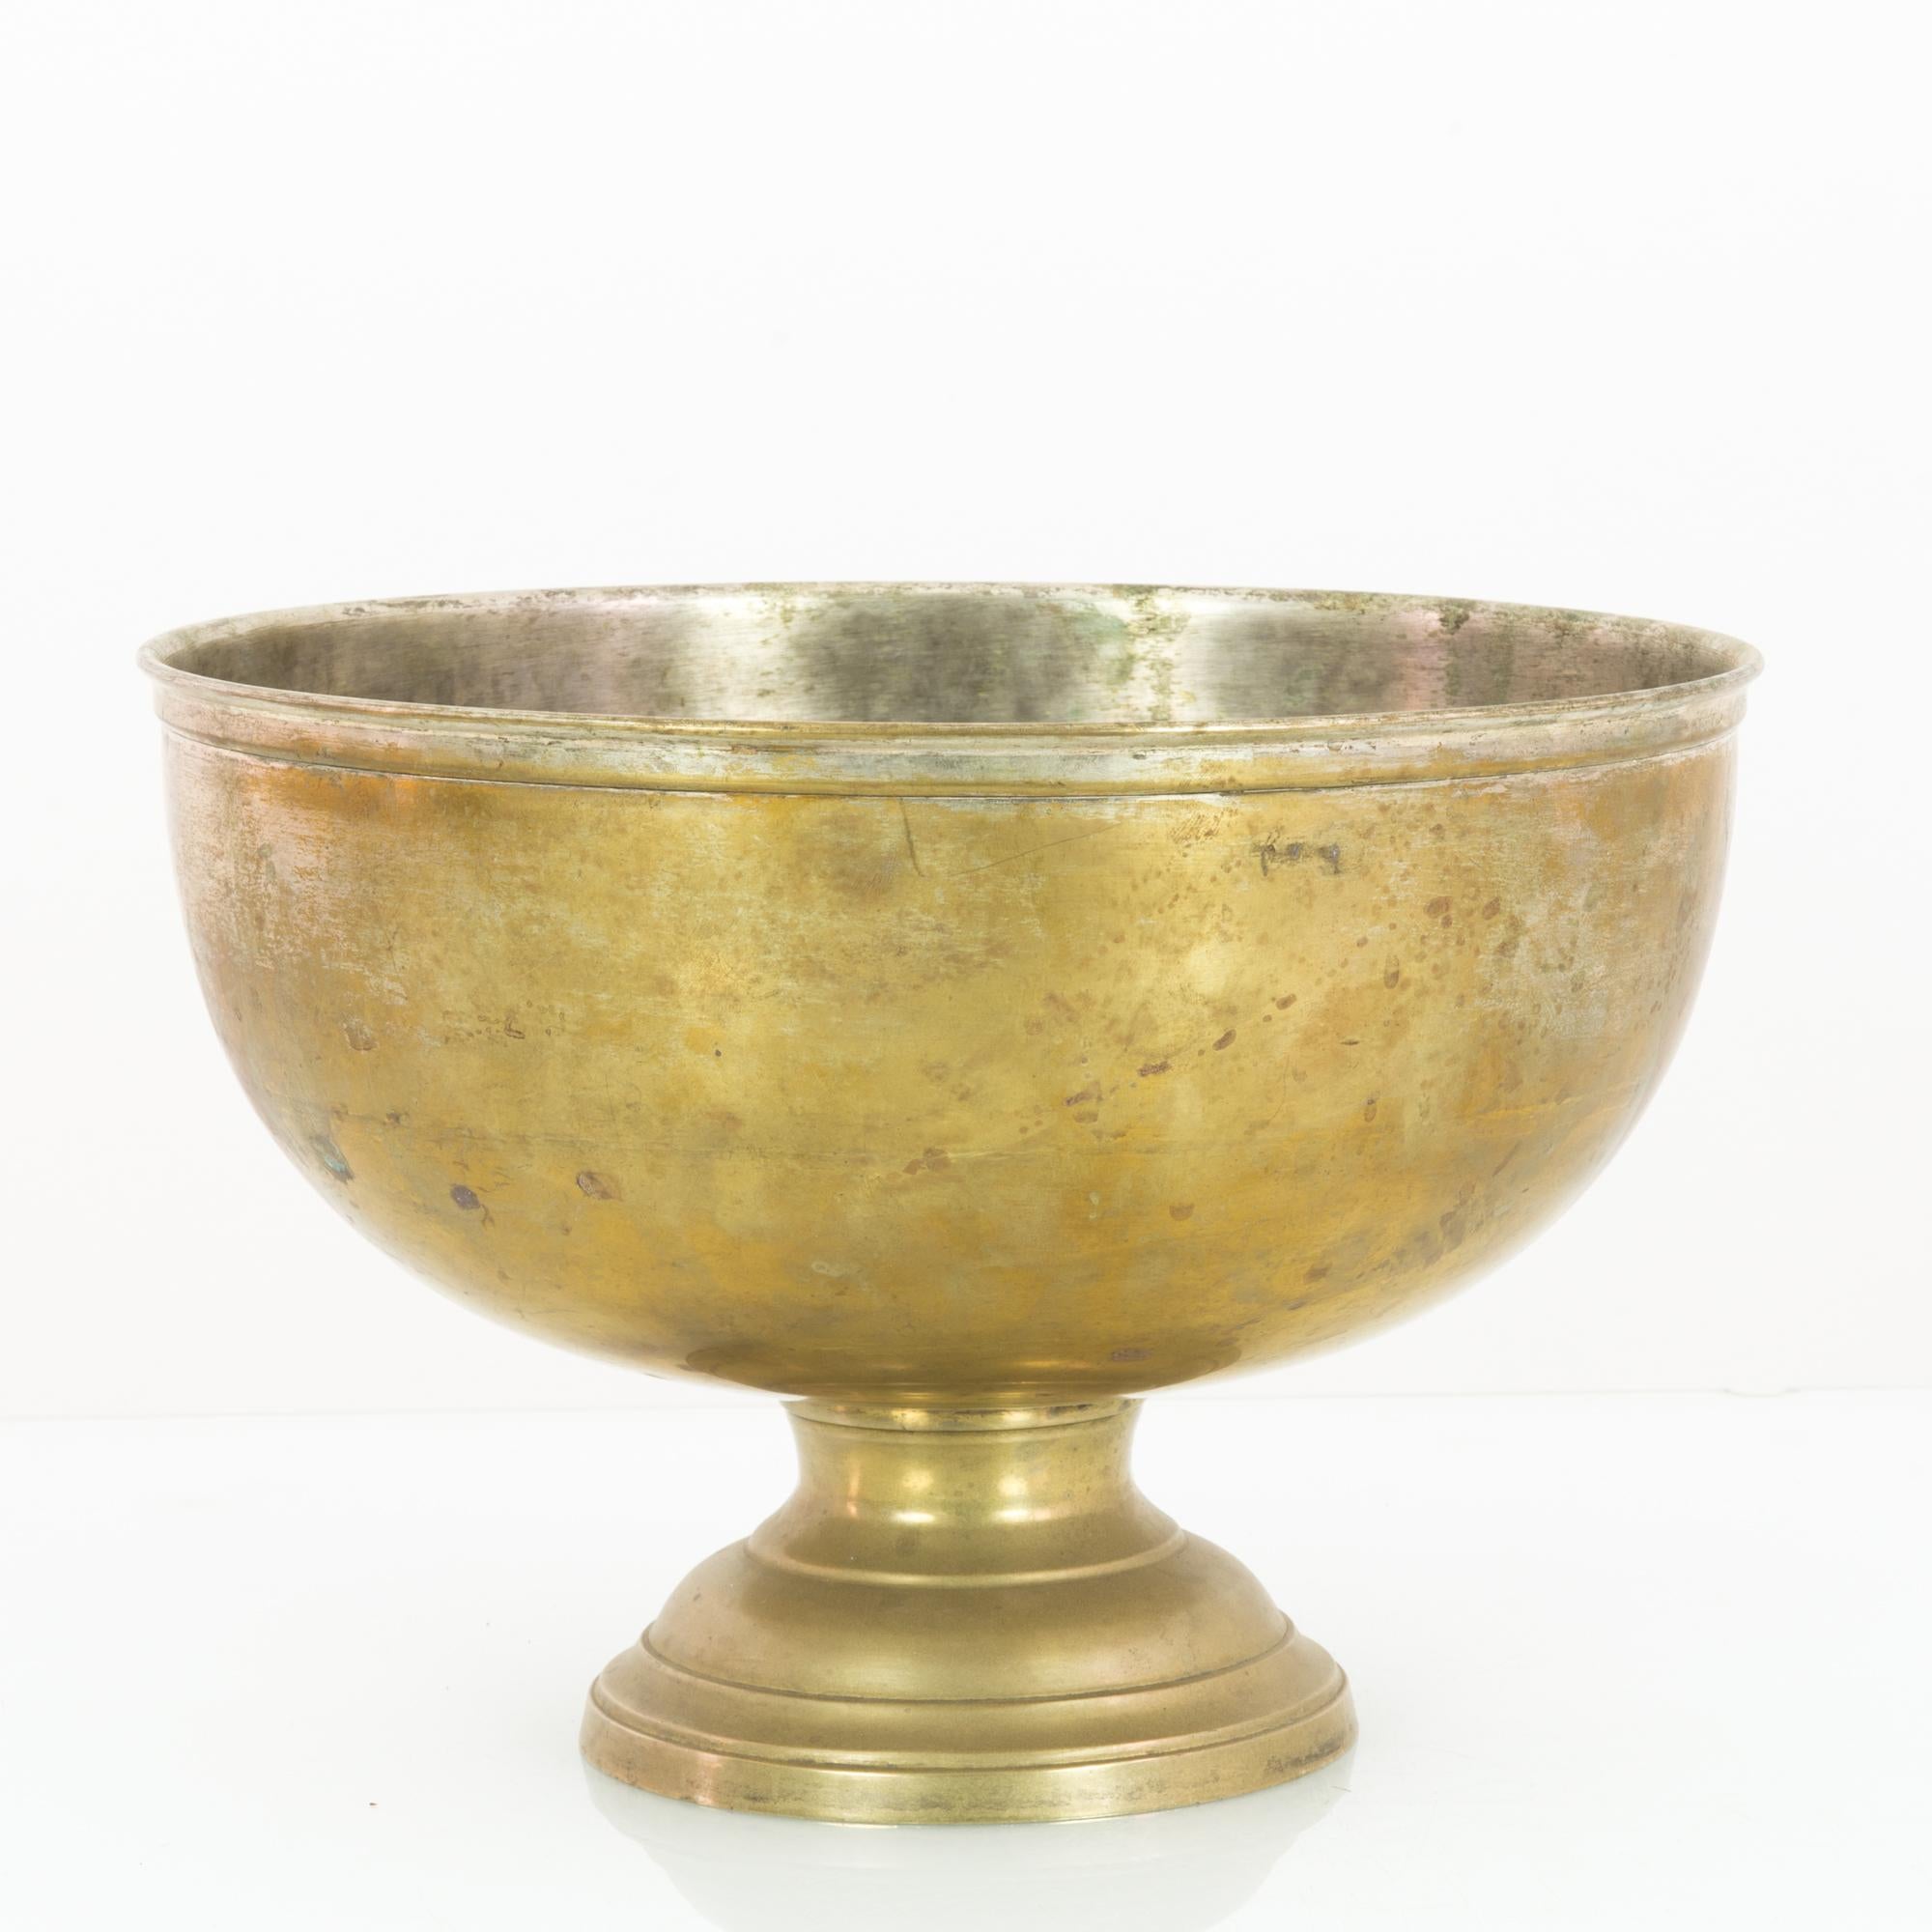 A brass bowl from France, circa 1920. A broad cup shape elevated on a low pedestal. The exterior surface has a muted gilded finish; the inside has worn to a silver shine. The patinated finish, smoothed and tarnished, adds to the impression of an